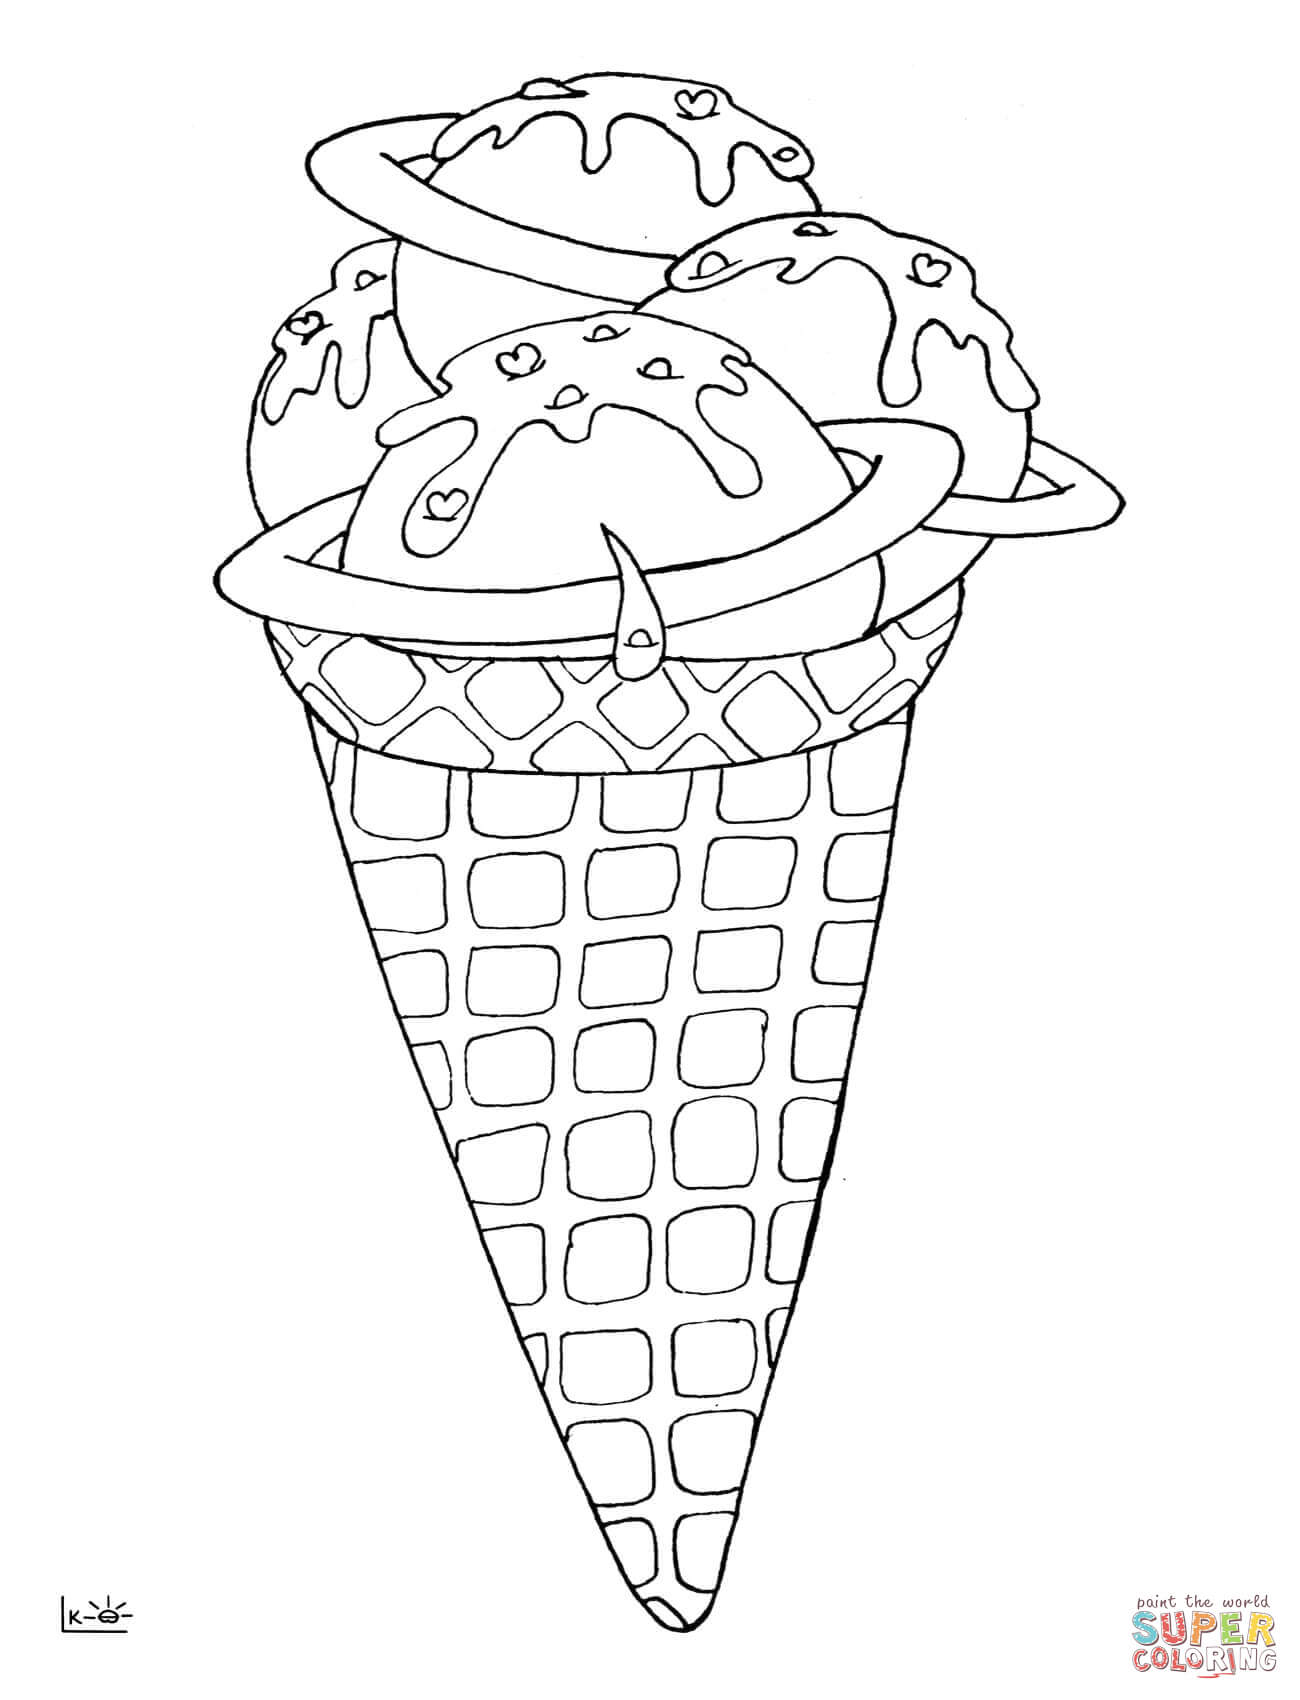 Coloring Pages : Desserts Coloring Book Free Mindfulness Colouring ...